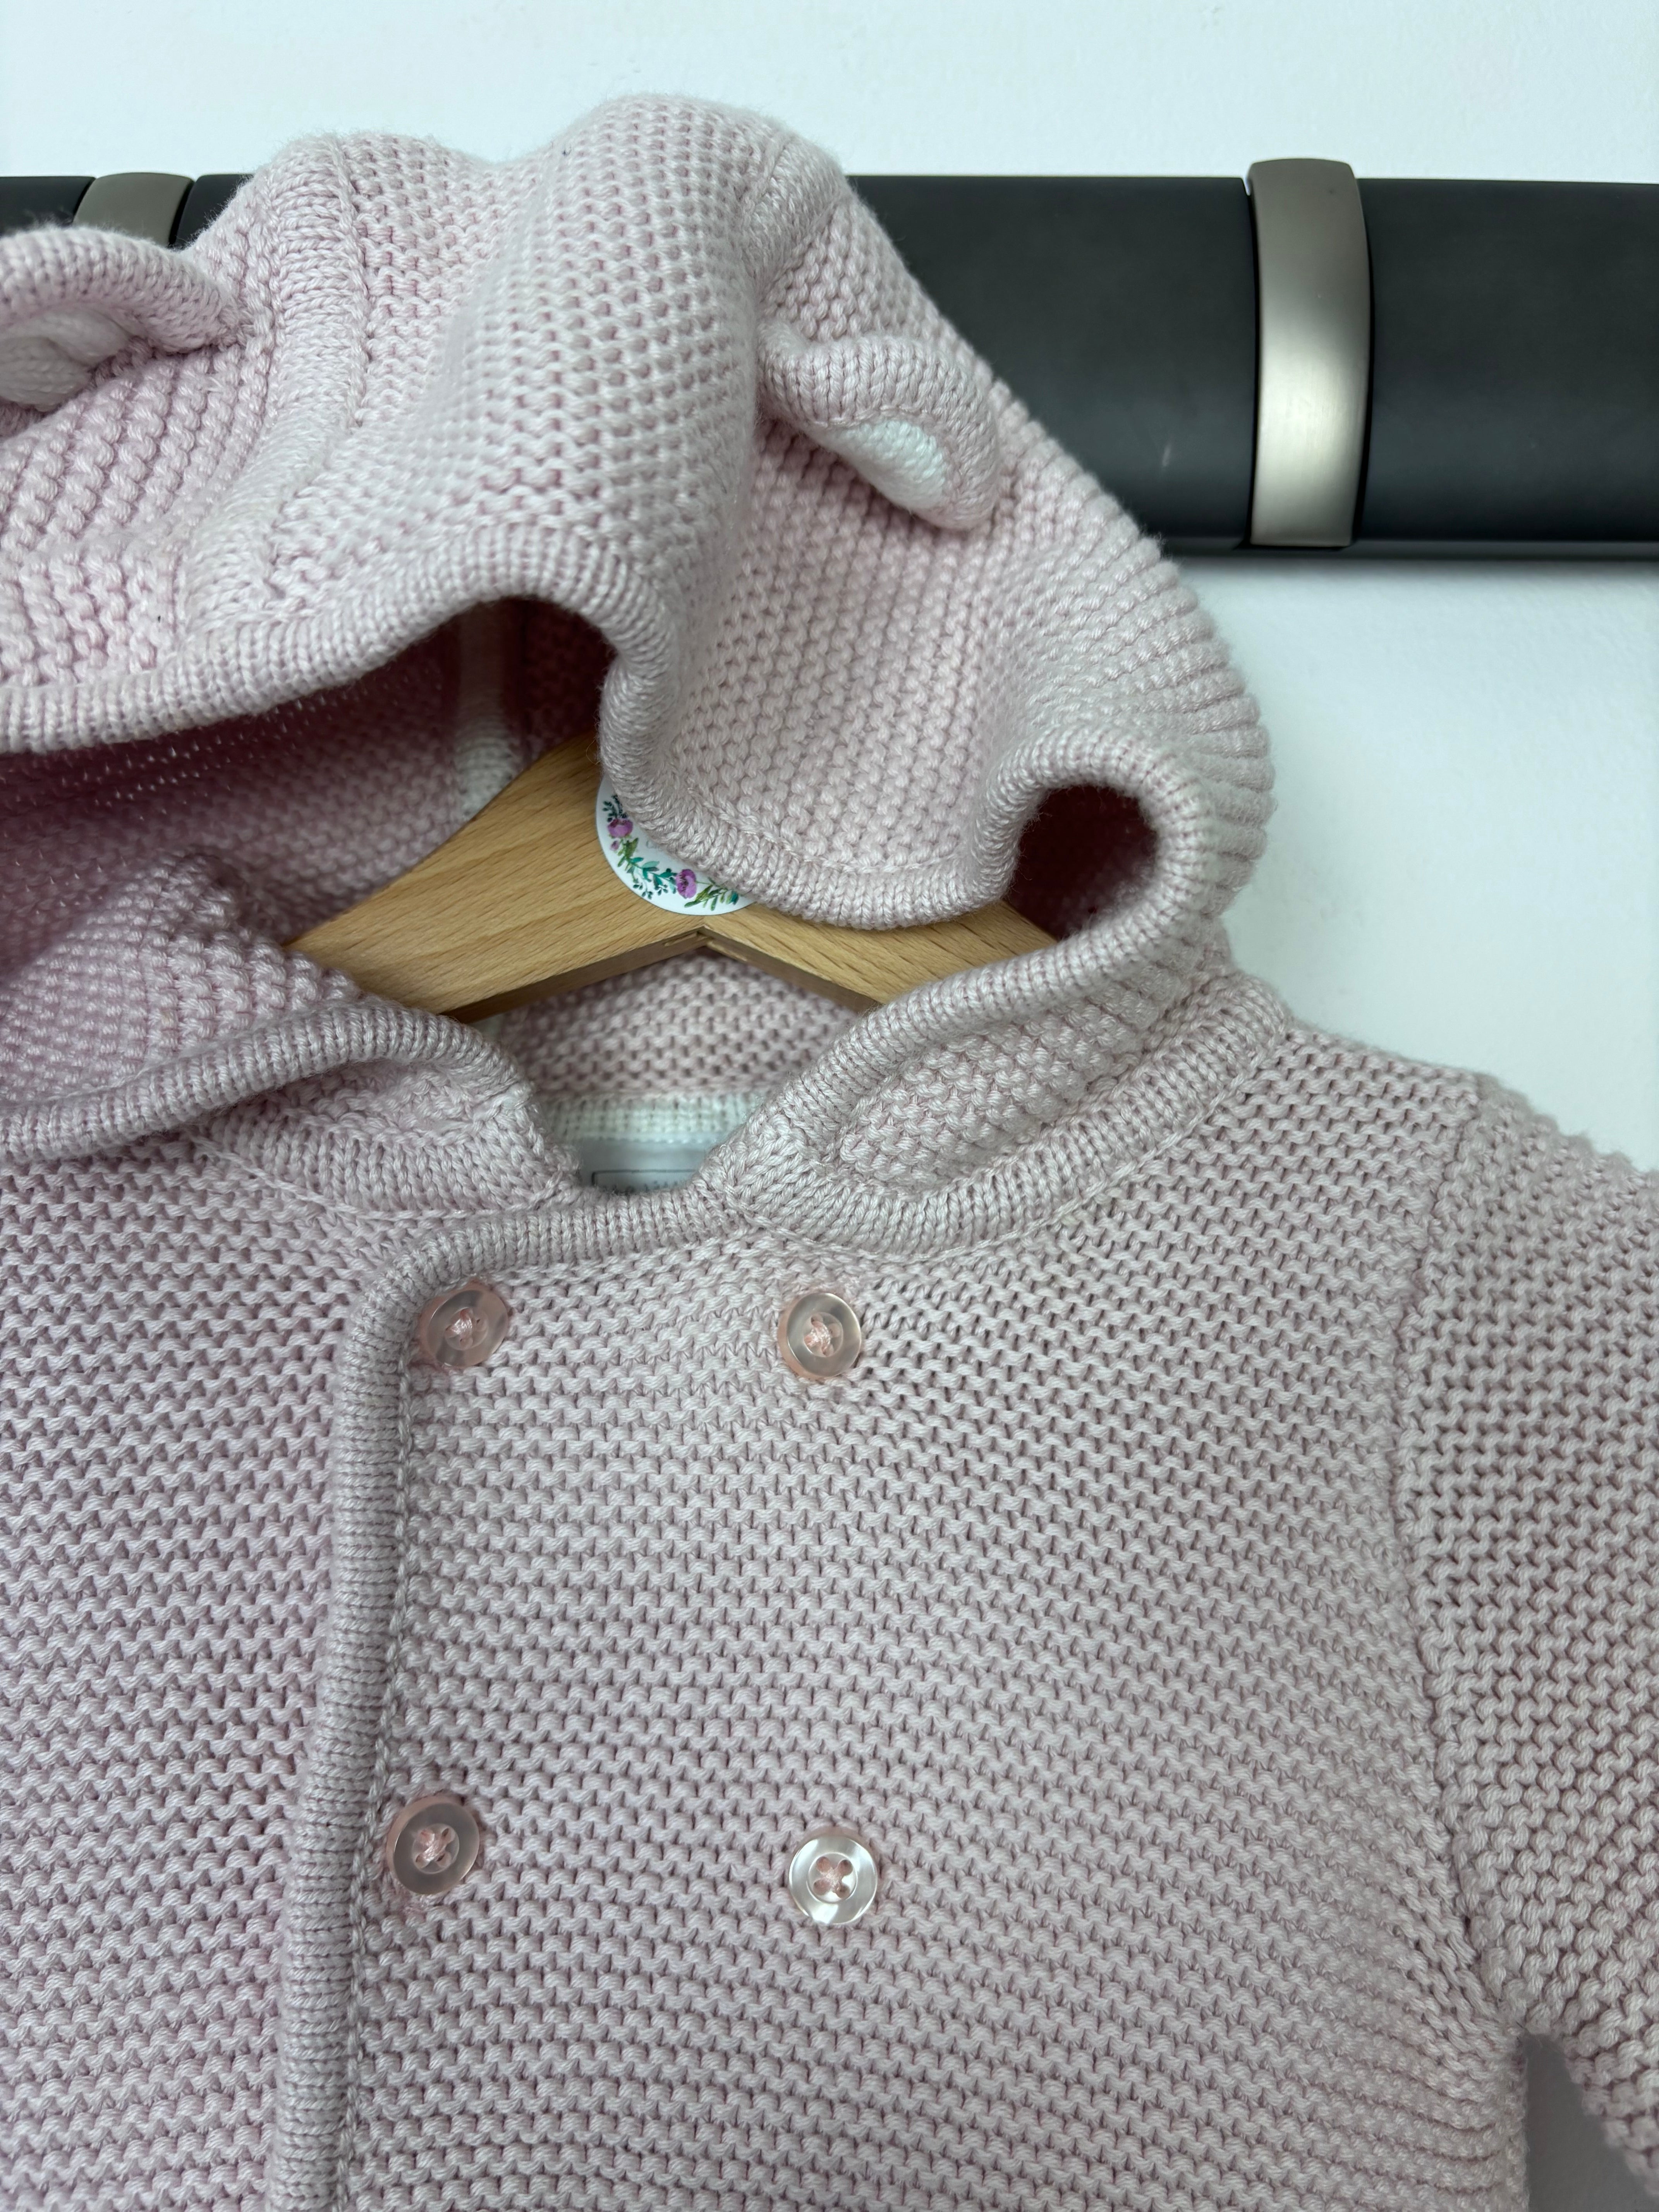 The Little White Company 0-3 Months-Cardigans-Second Snuggle Preloved